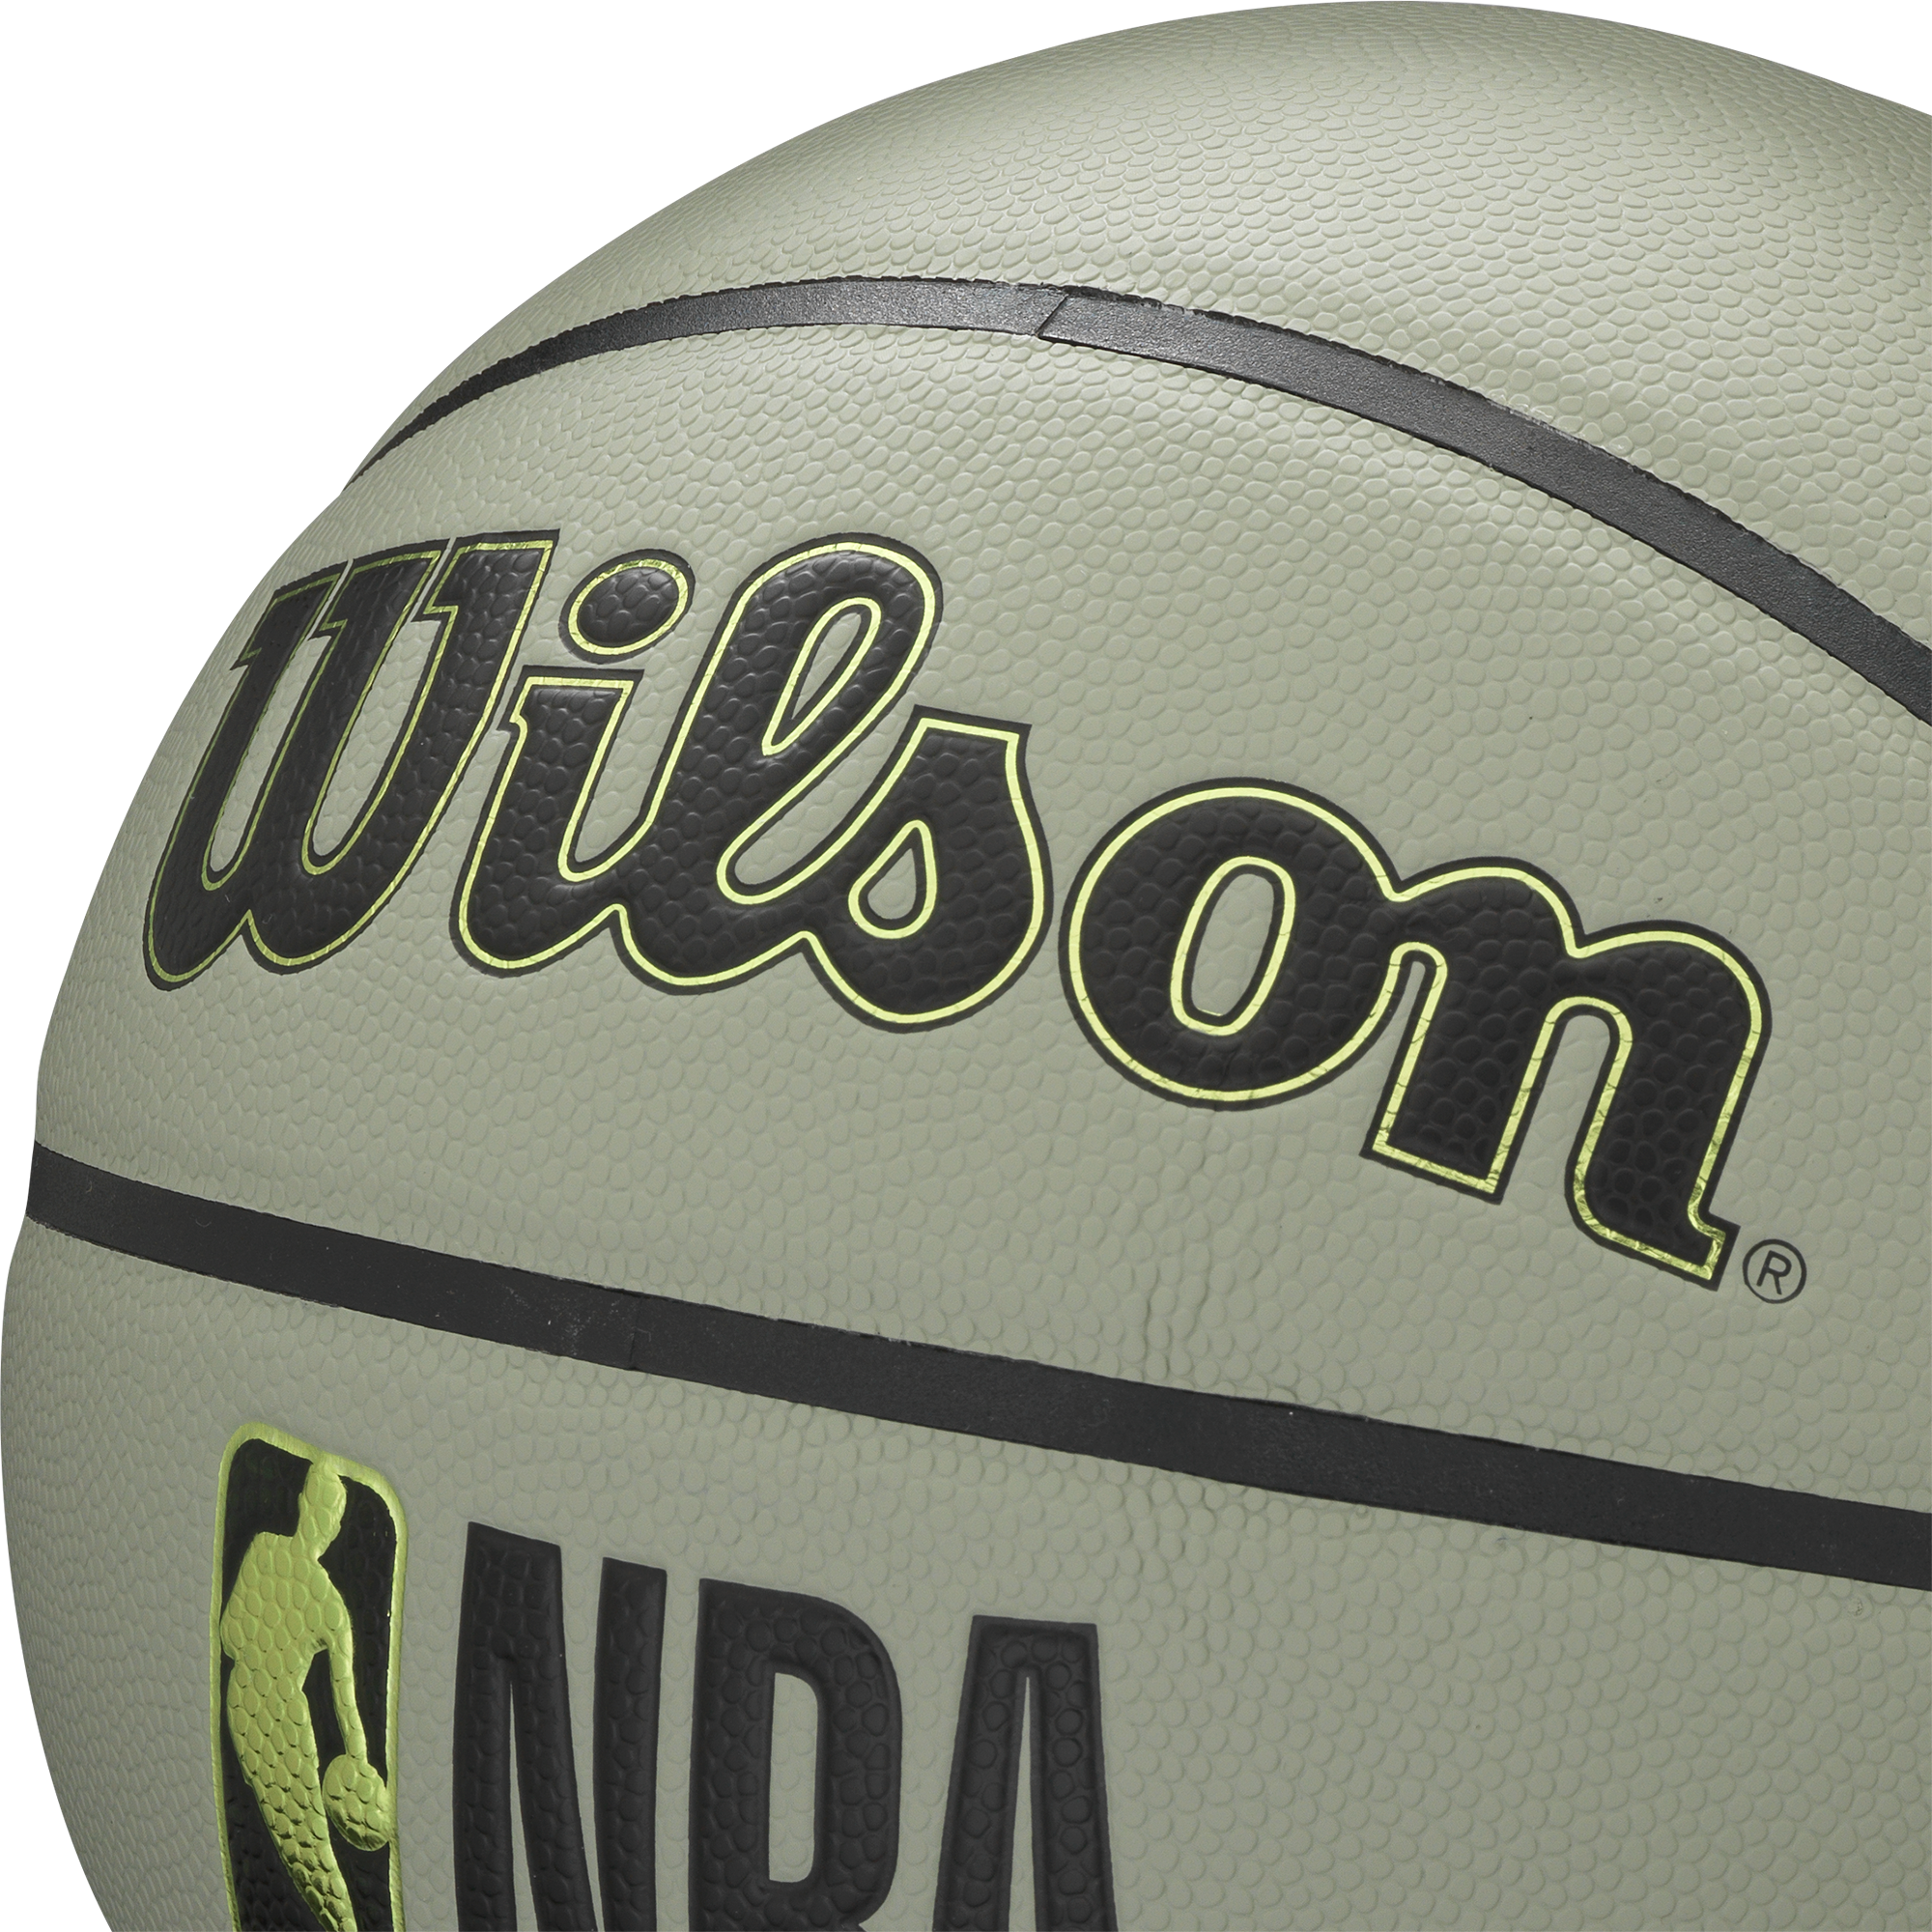  WILSON NBA Forge Series Indoor/Outdoor Basketball - Forge Pro,  Black, Size 5-27.5 : Sports & Outdoors